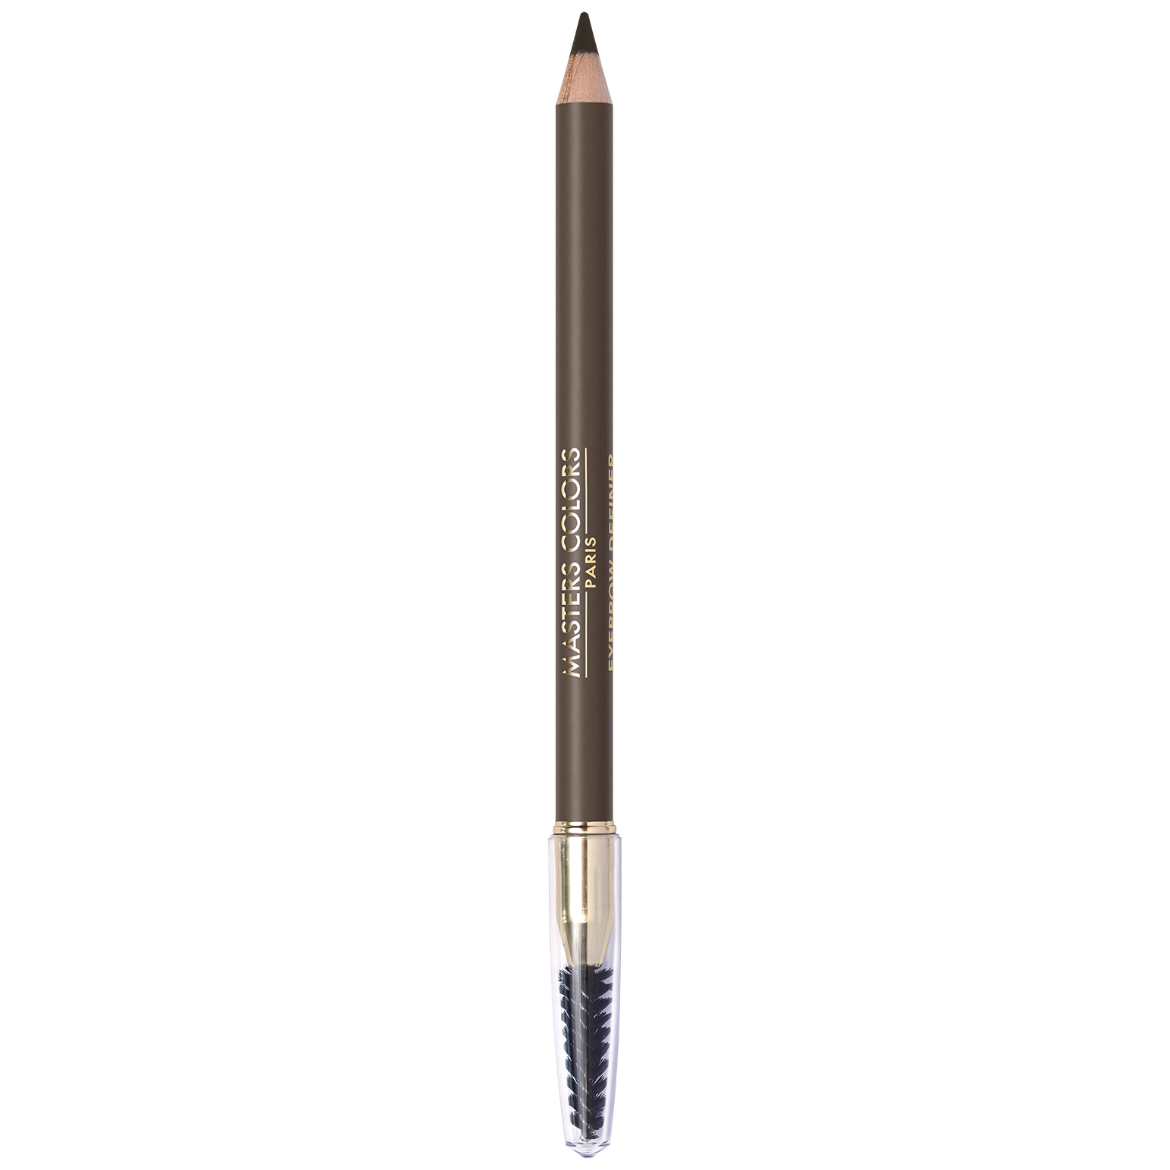 Image de Masters Colors Eyebrow Precision 02 Chatin Clair (1,1g)